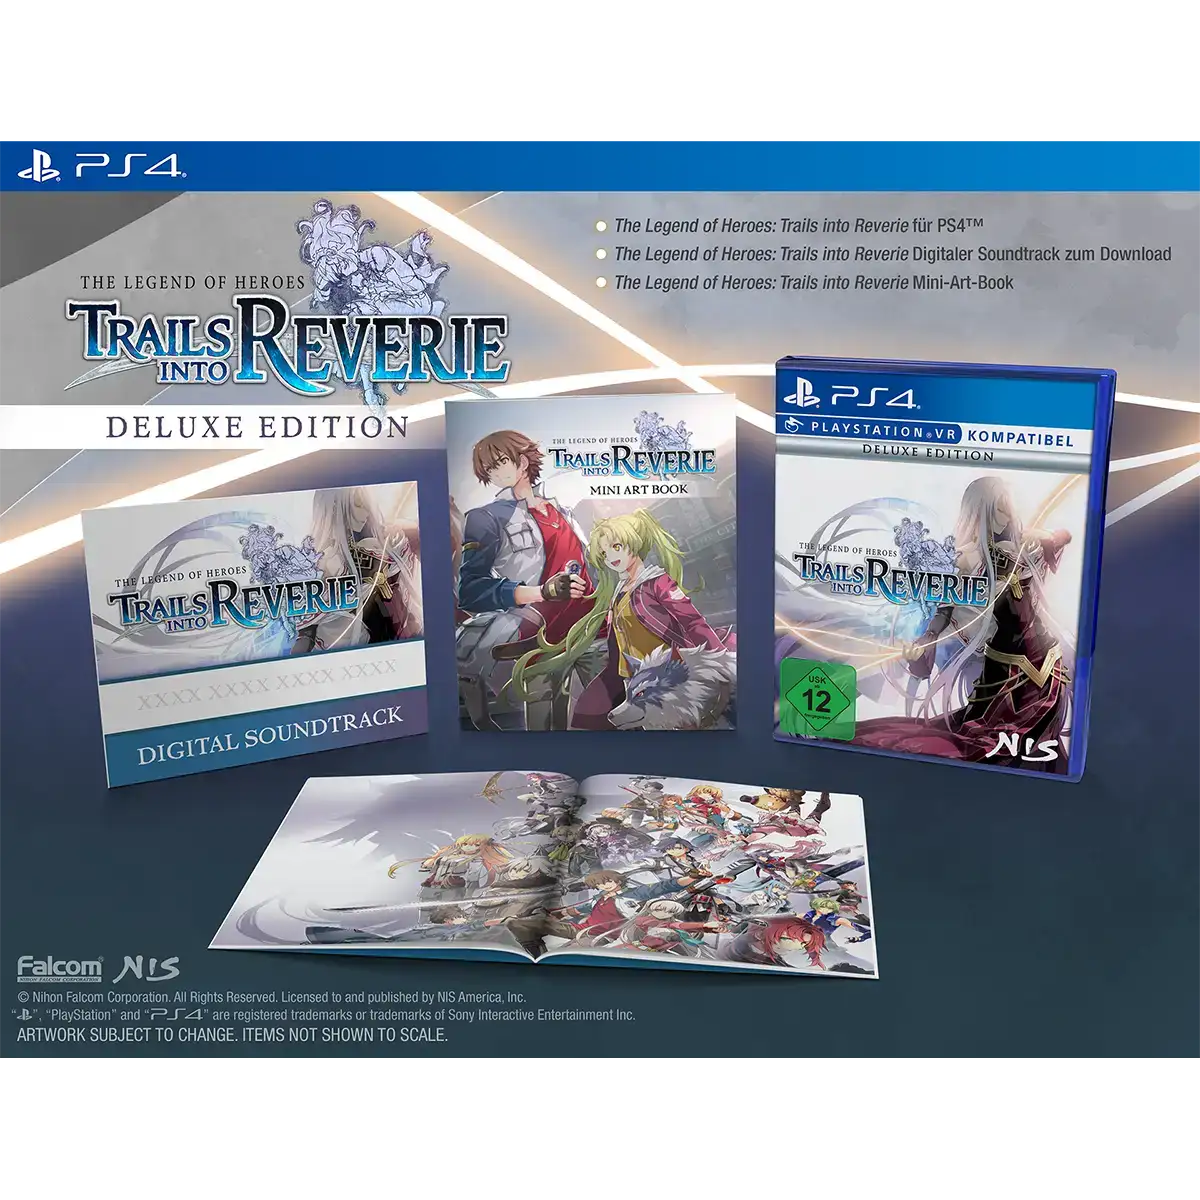 The Legend of Heroes: Trails into Reverie - Deluxe Edition (PS4) Image 2